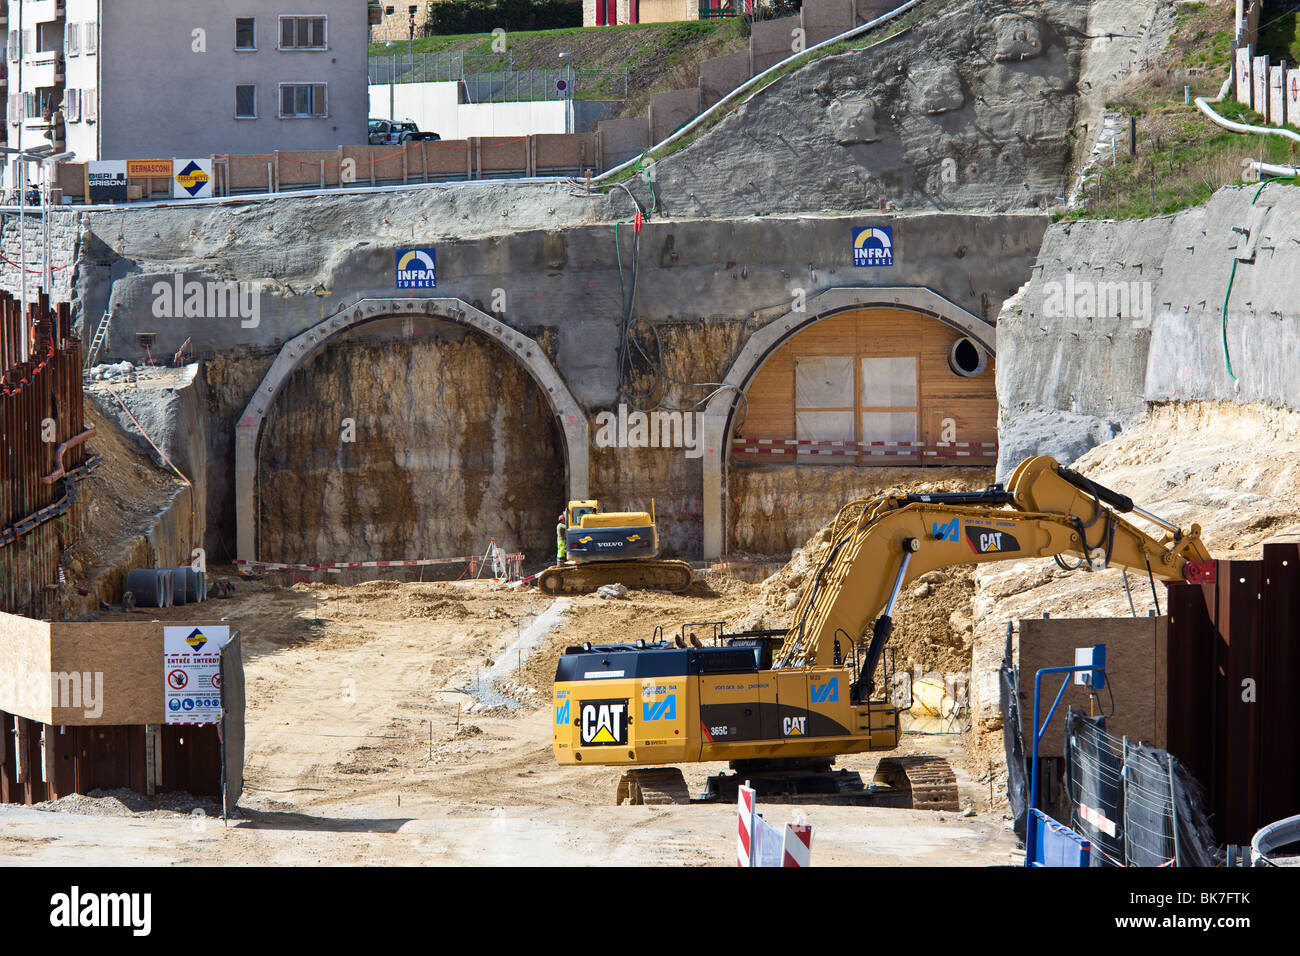 Construction of a new tunnel on the A5 Autoroute, Neuchatel, Switzerland. Charles Lupica Stock Photo